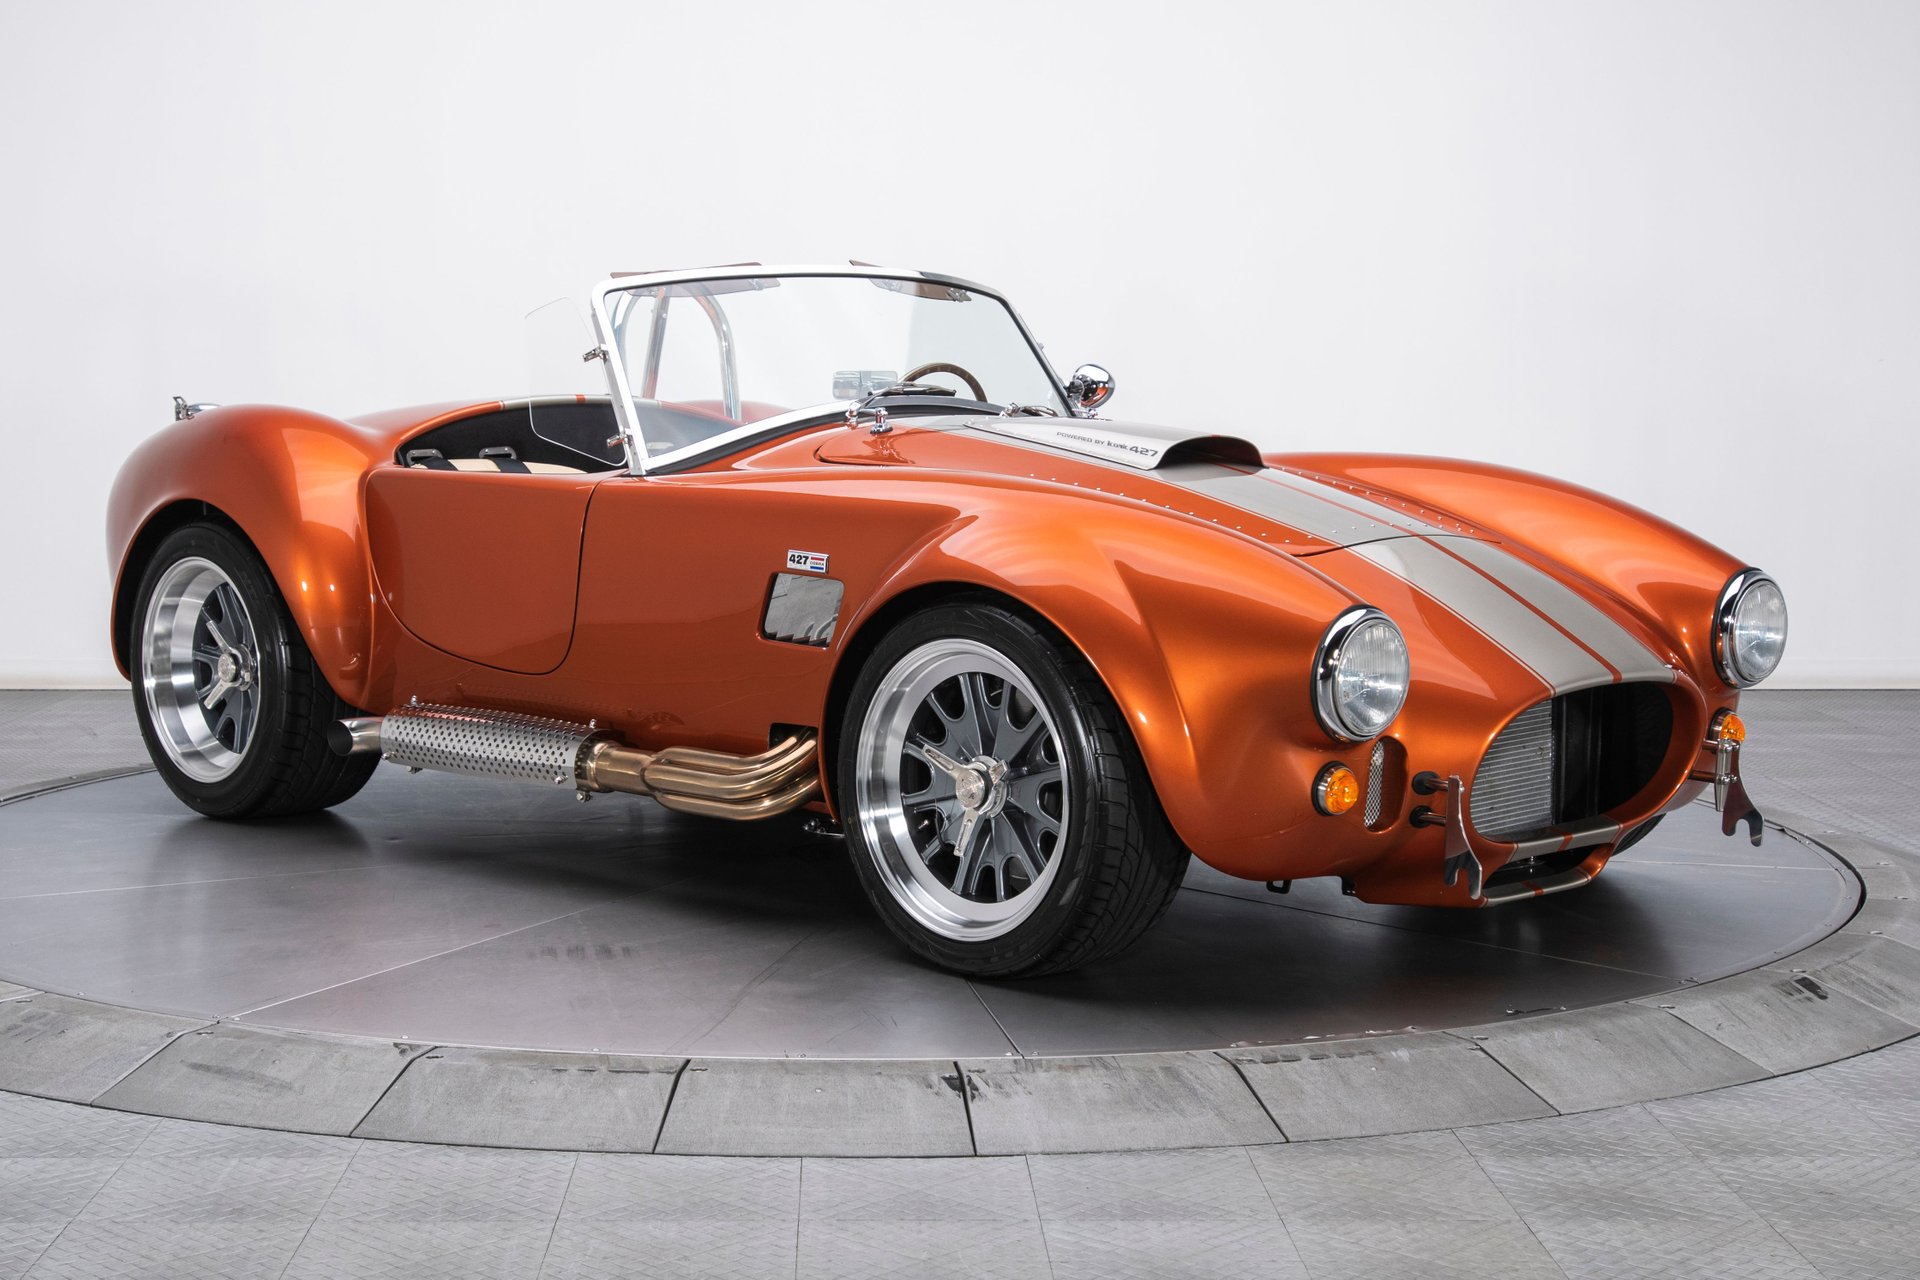 Forpustet neutral Havbrasme 1965 Shelby Cobra 427 Replica Matches Iconic V8 Engine With BMW Components  - autoevolution